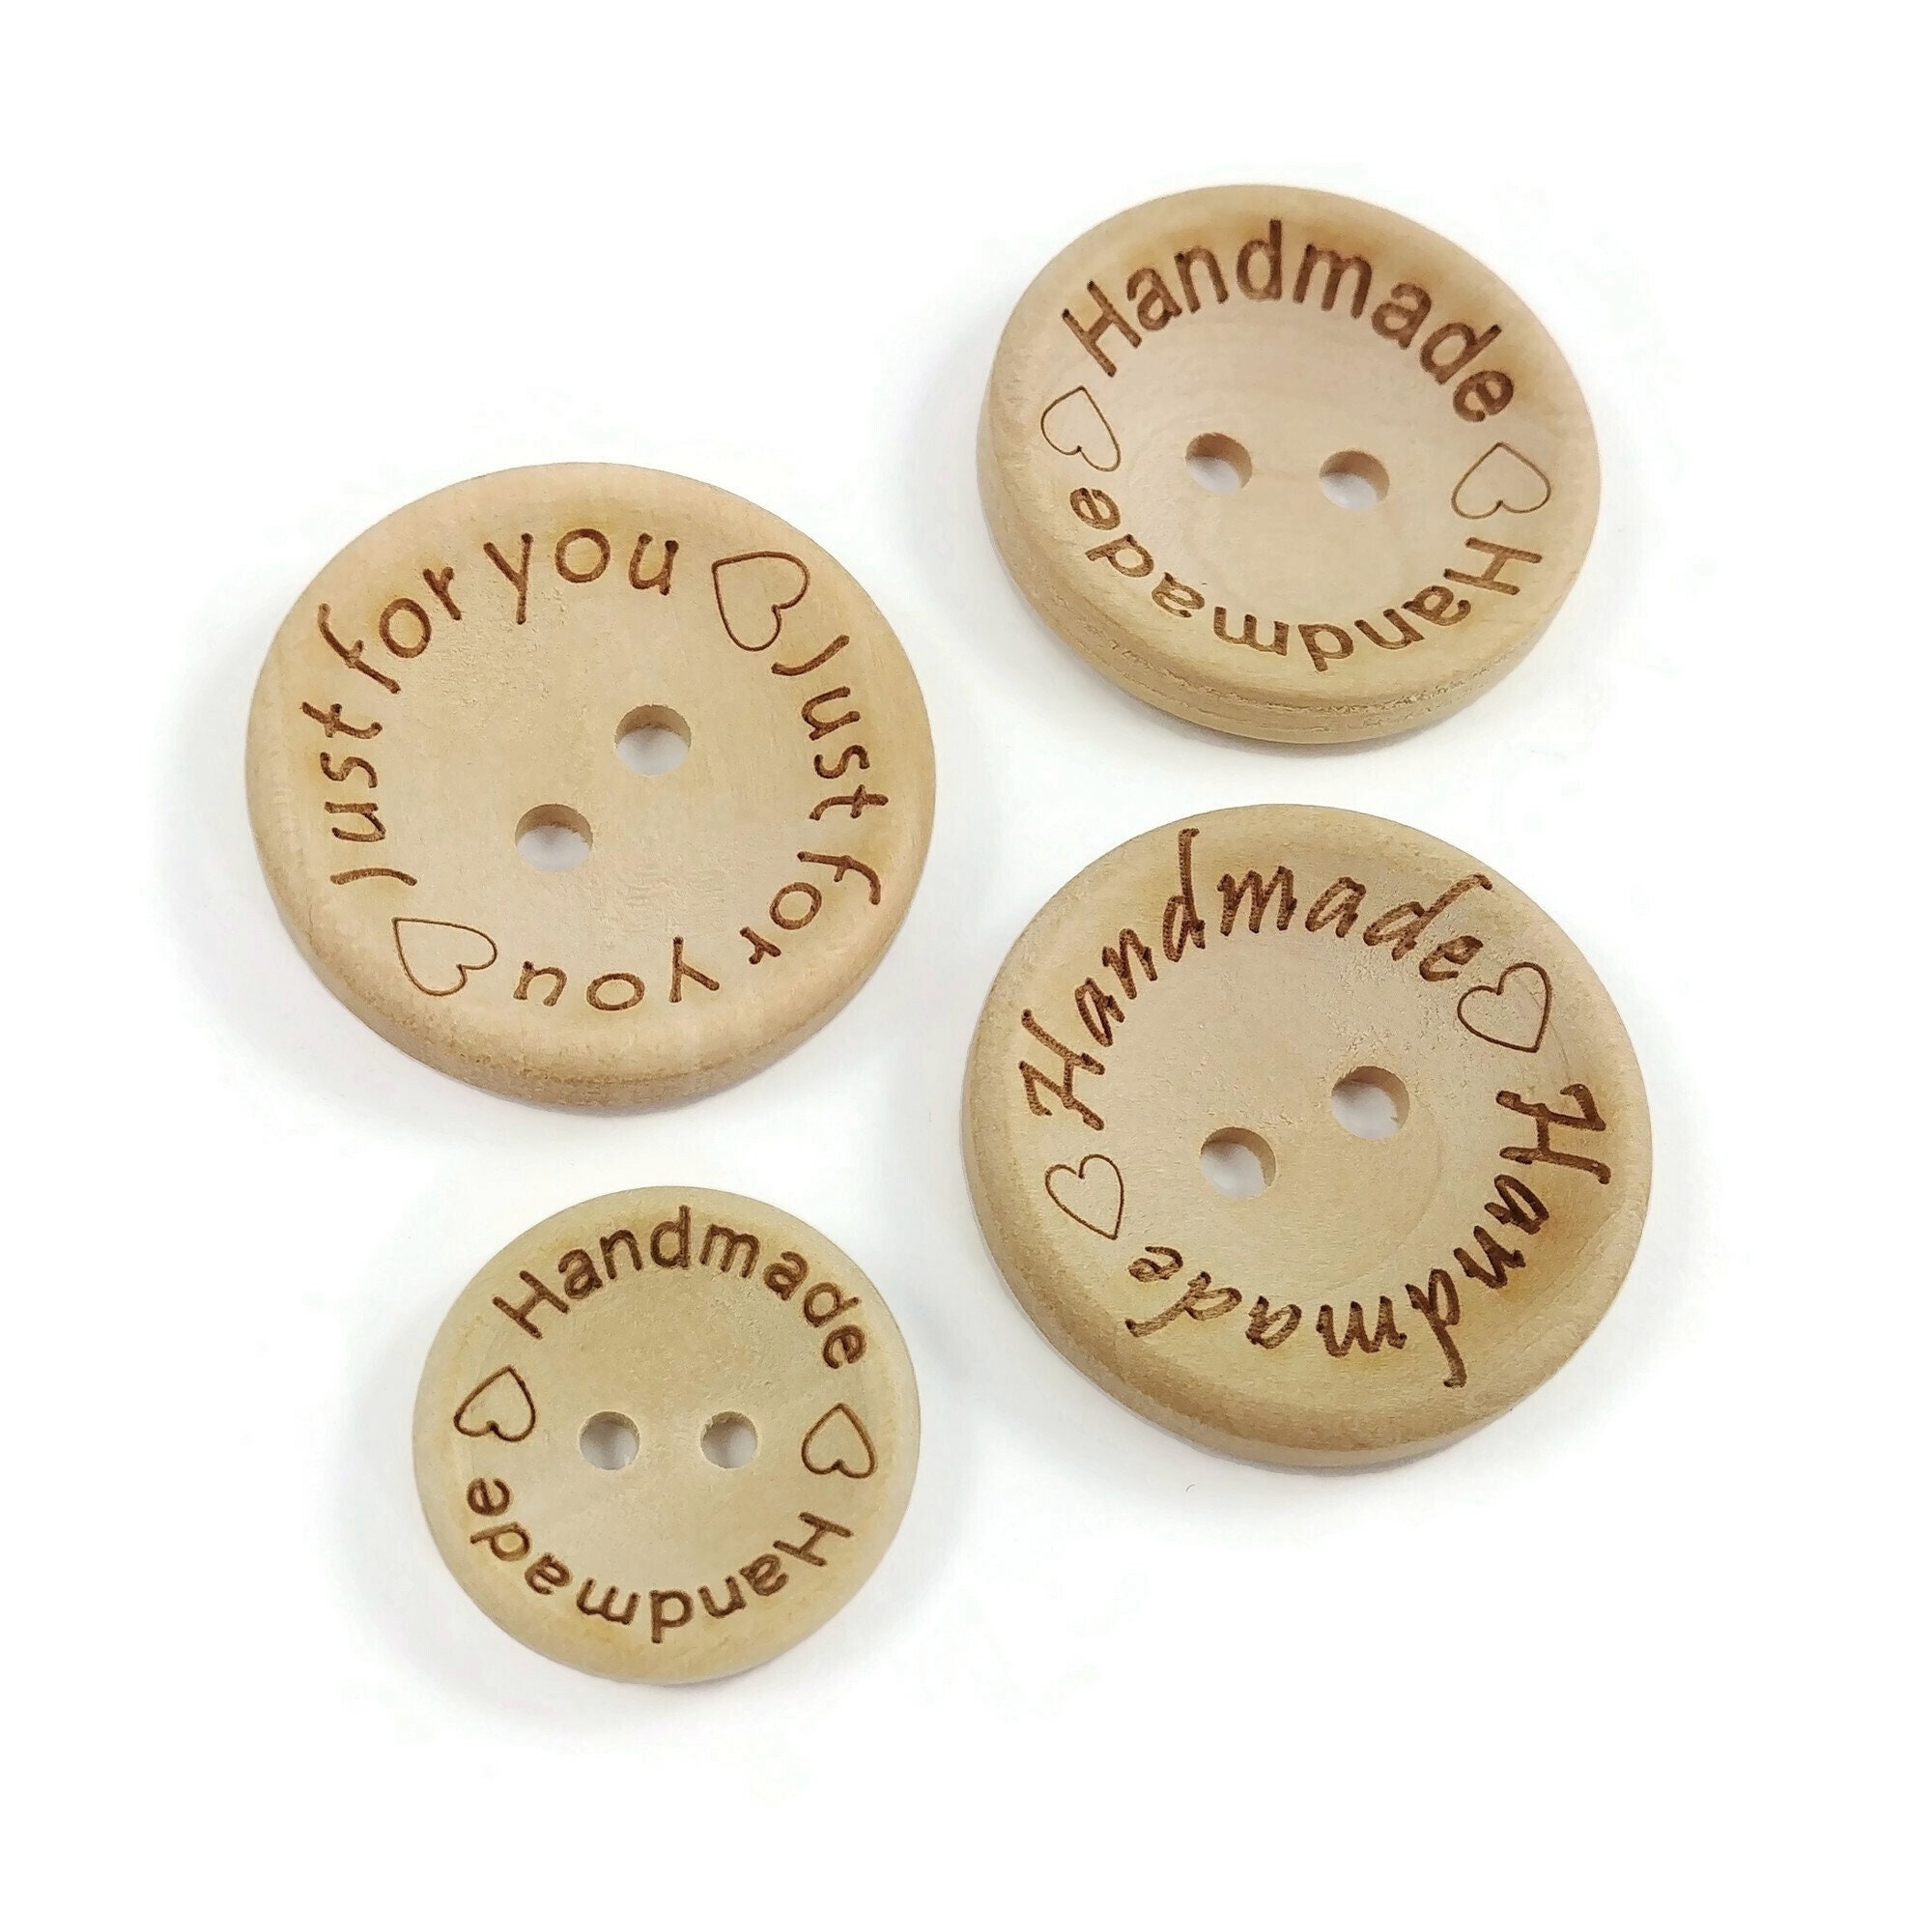 LUXURY WOODEN HANDMADE WITH LOVE BUTTONS - 20mm, 30mm, HEART, SEWING, KNIT,  UK 